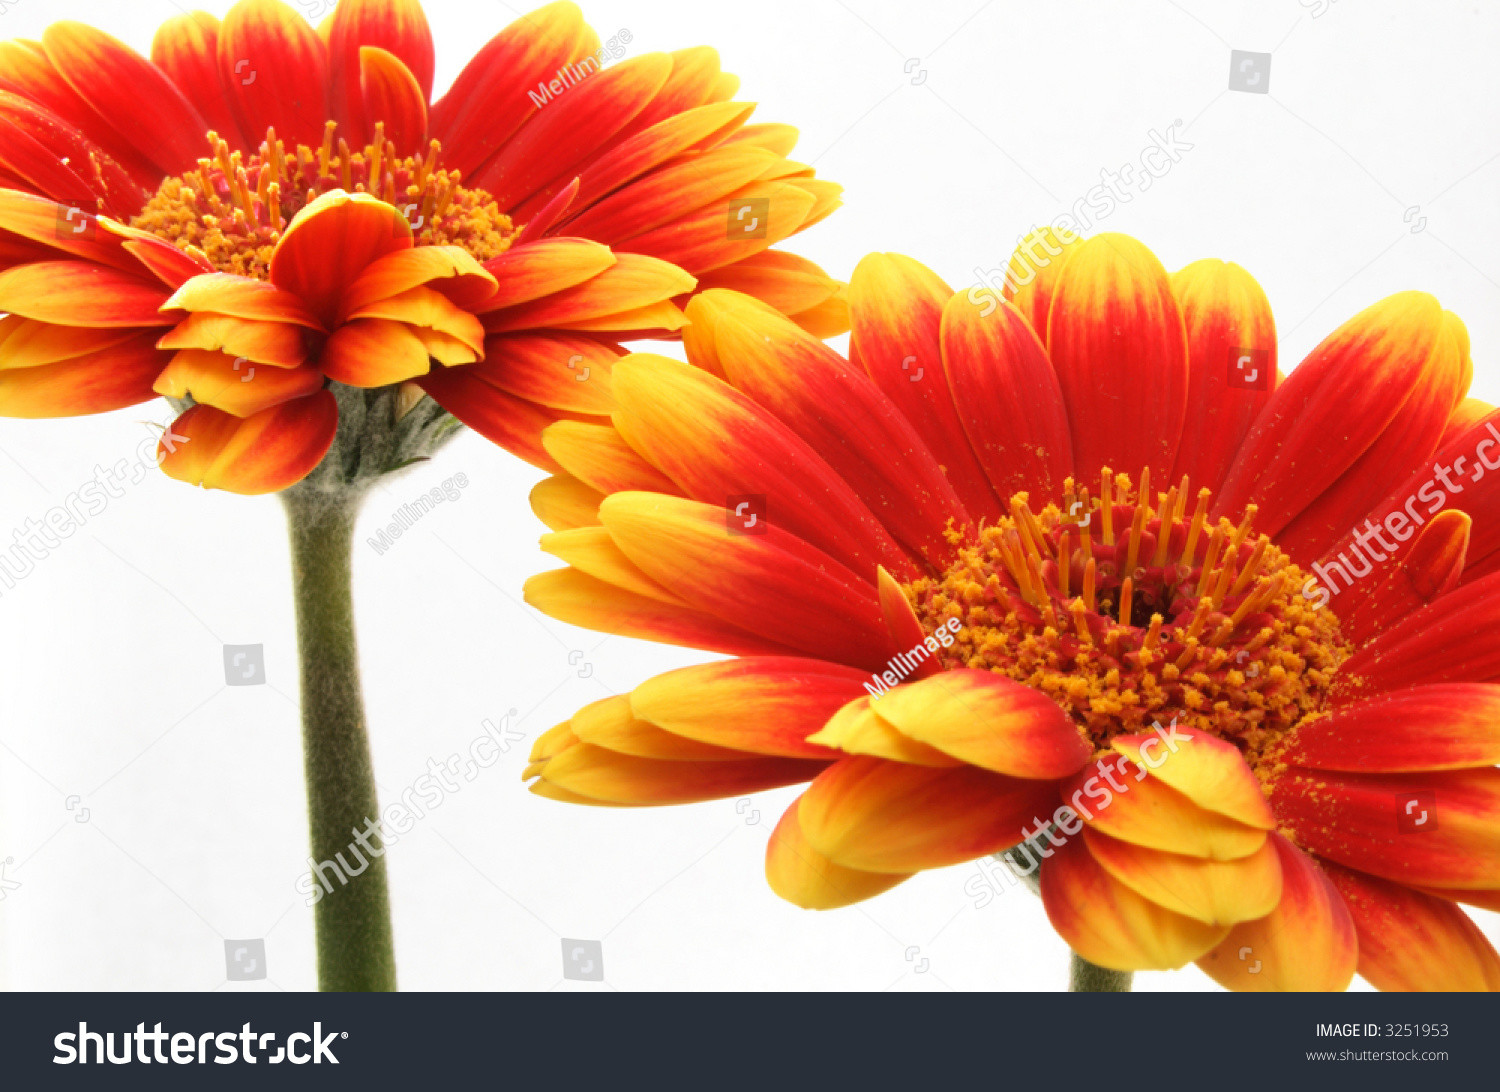 19 Amazing Gerbera Daisy In Vase 2024 free download gerbera daisy in vase of two red yellow gerber daisies stock photo edit now 3251953 with two red and yellow gerber daisies